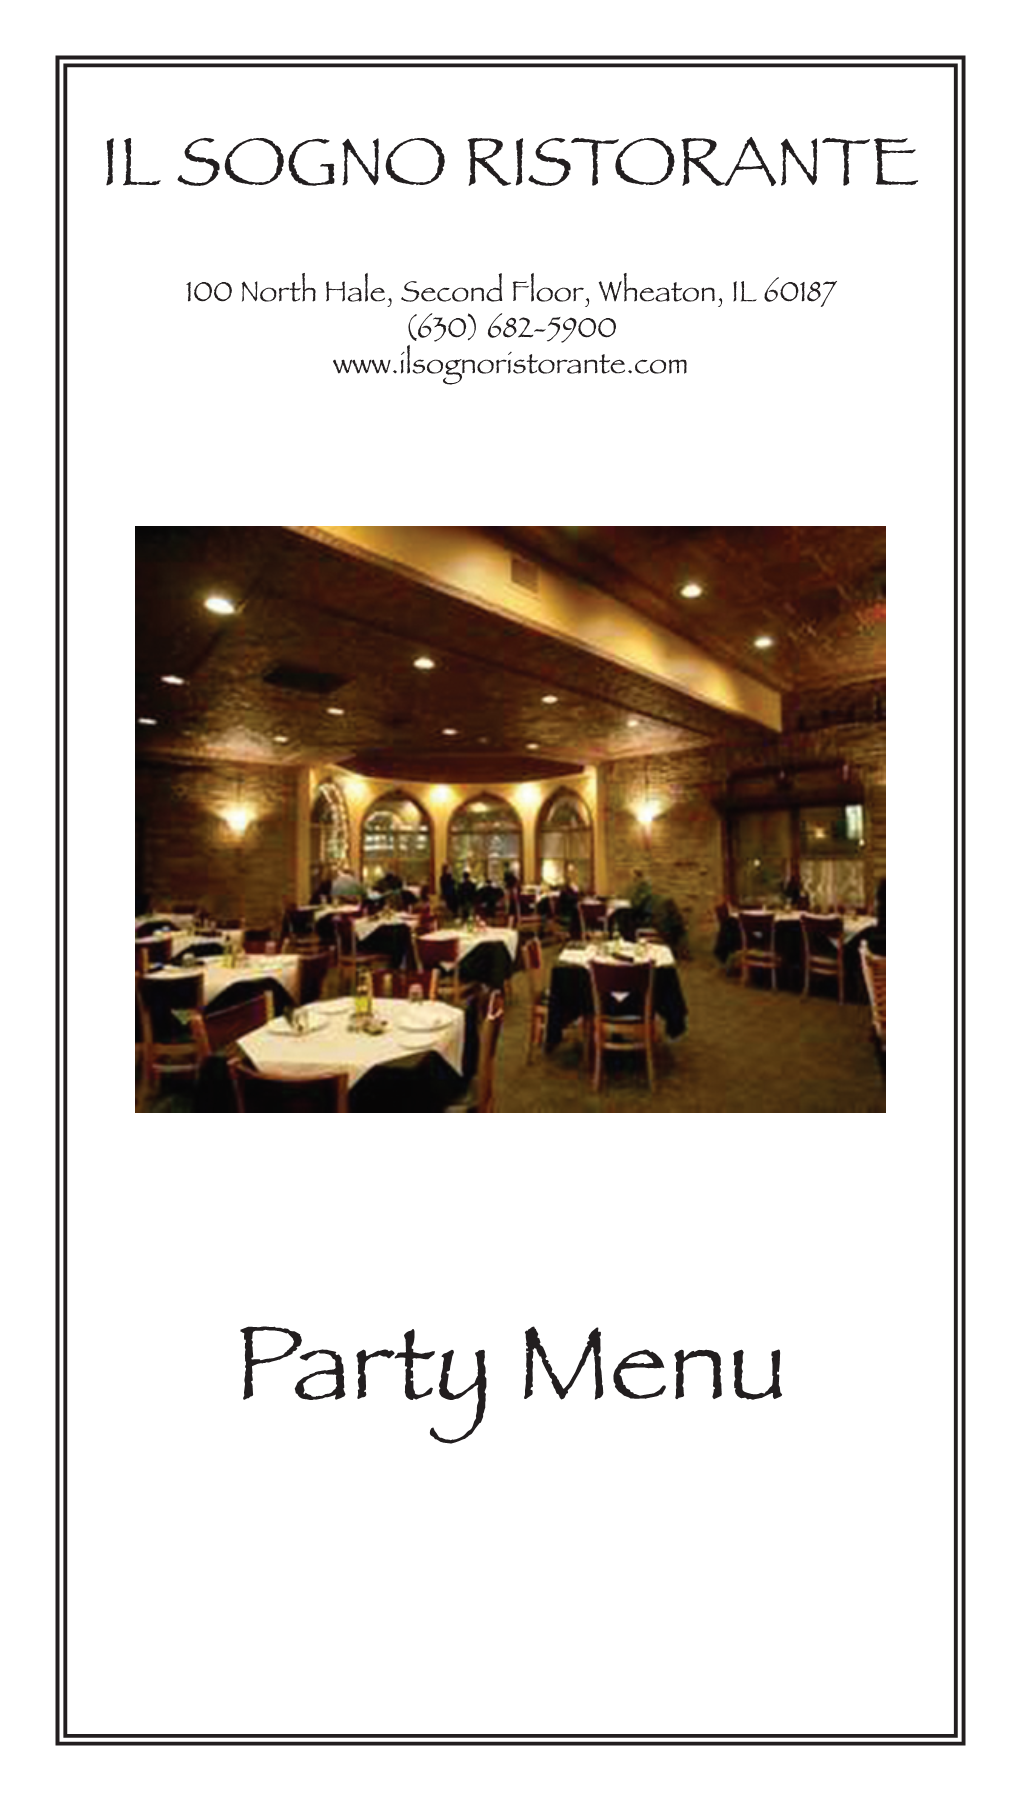 Party Menu Our Chefs Have Created Few Options to Choose From, Both Traditional and Modern